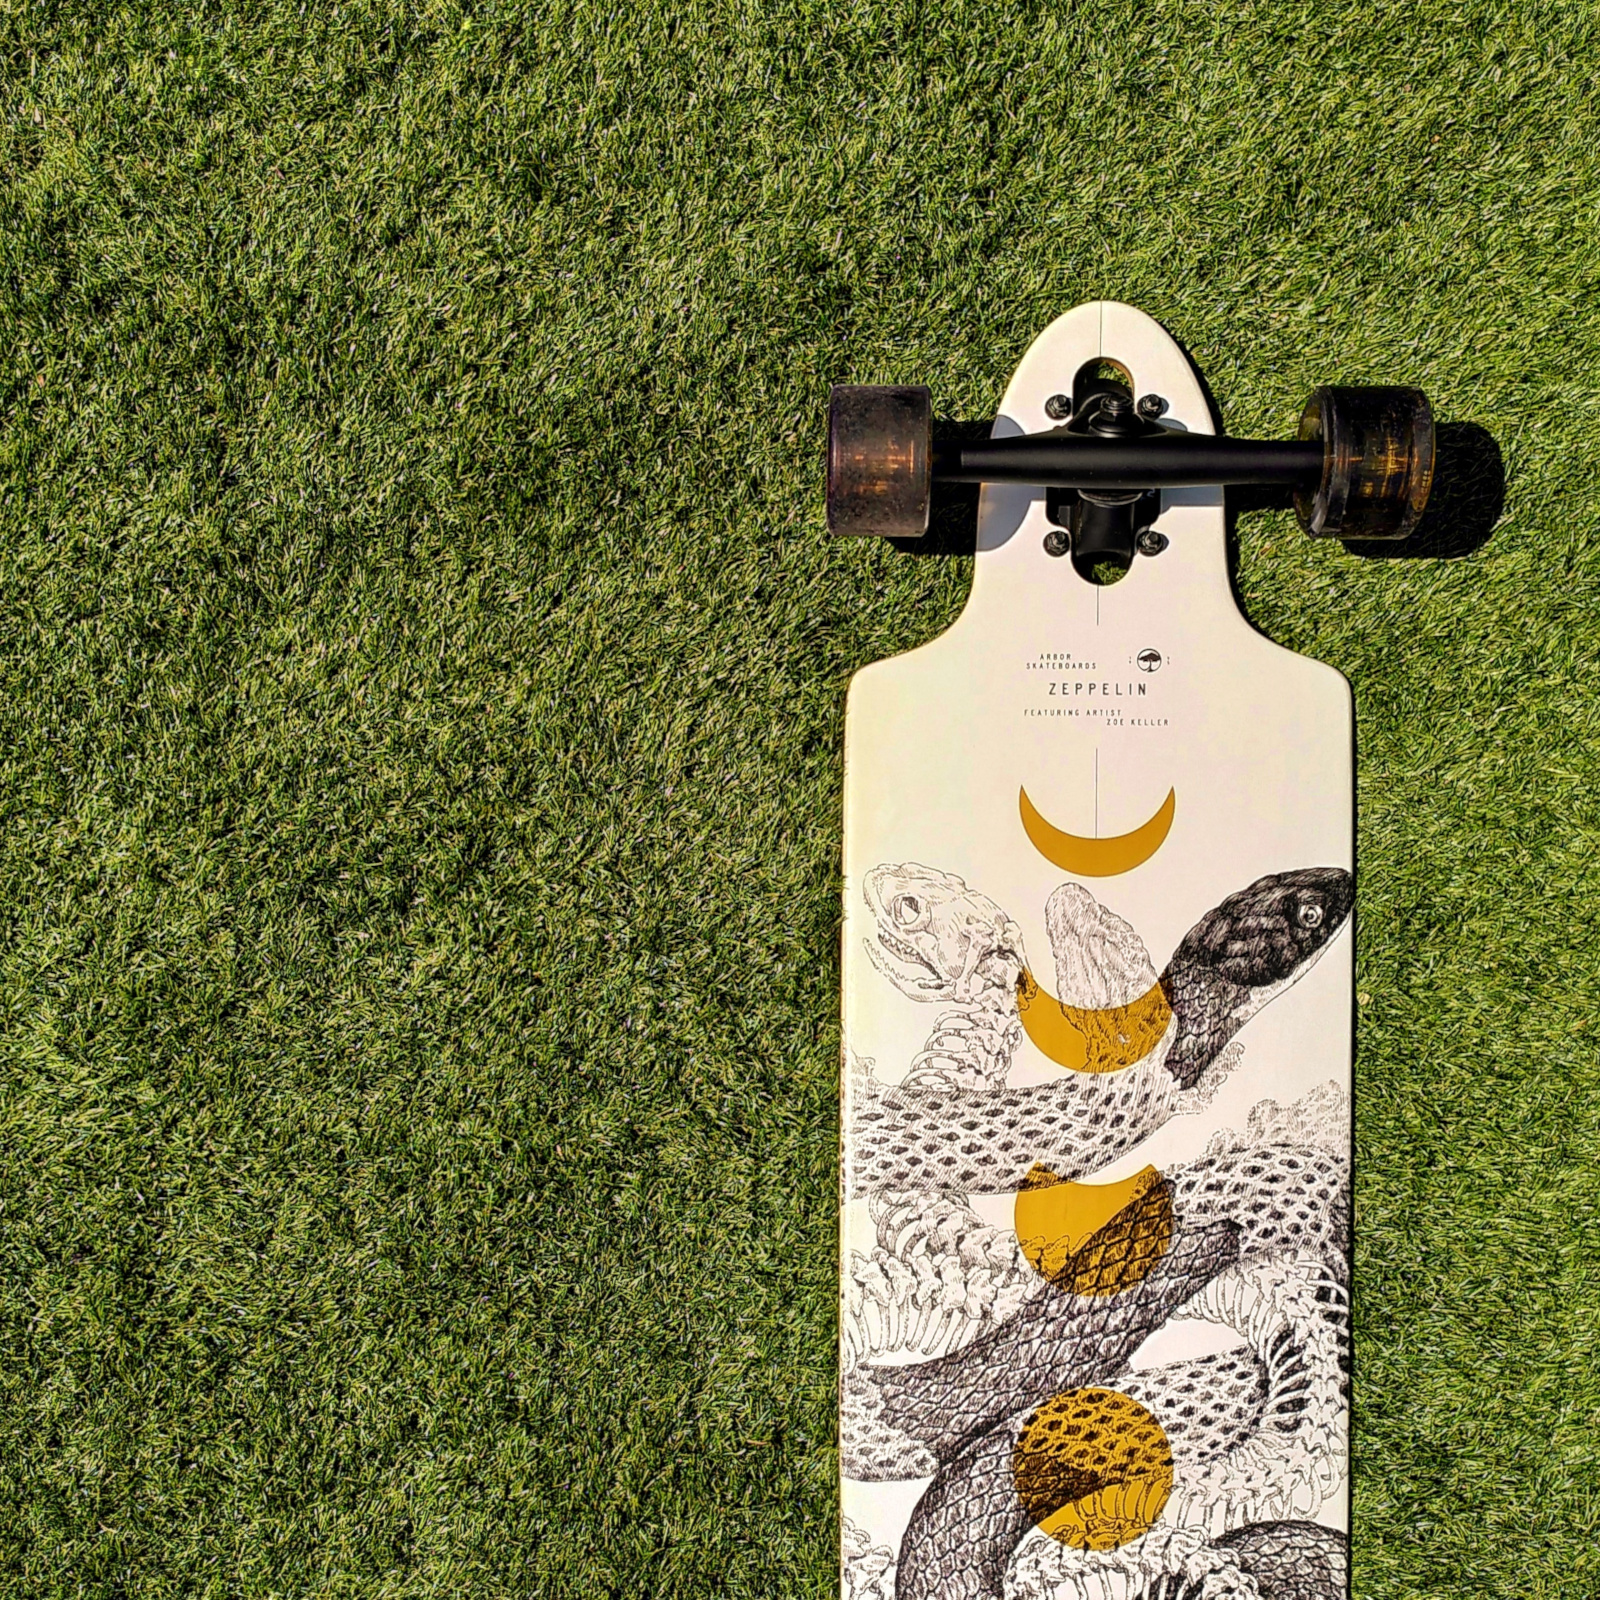 Photo of the top half of a skateboard on top of green grass. The skateboard is white, with a black and white snake illustration design on it.